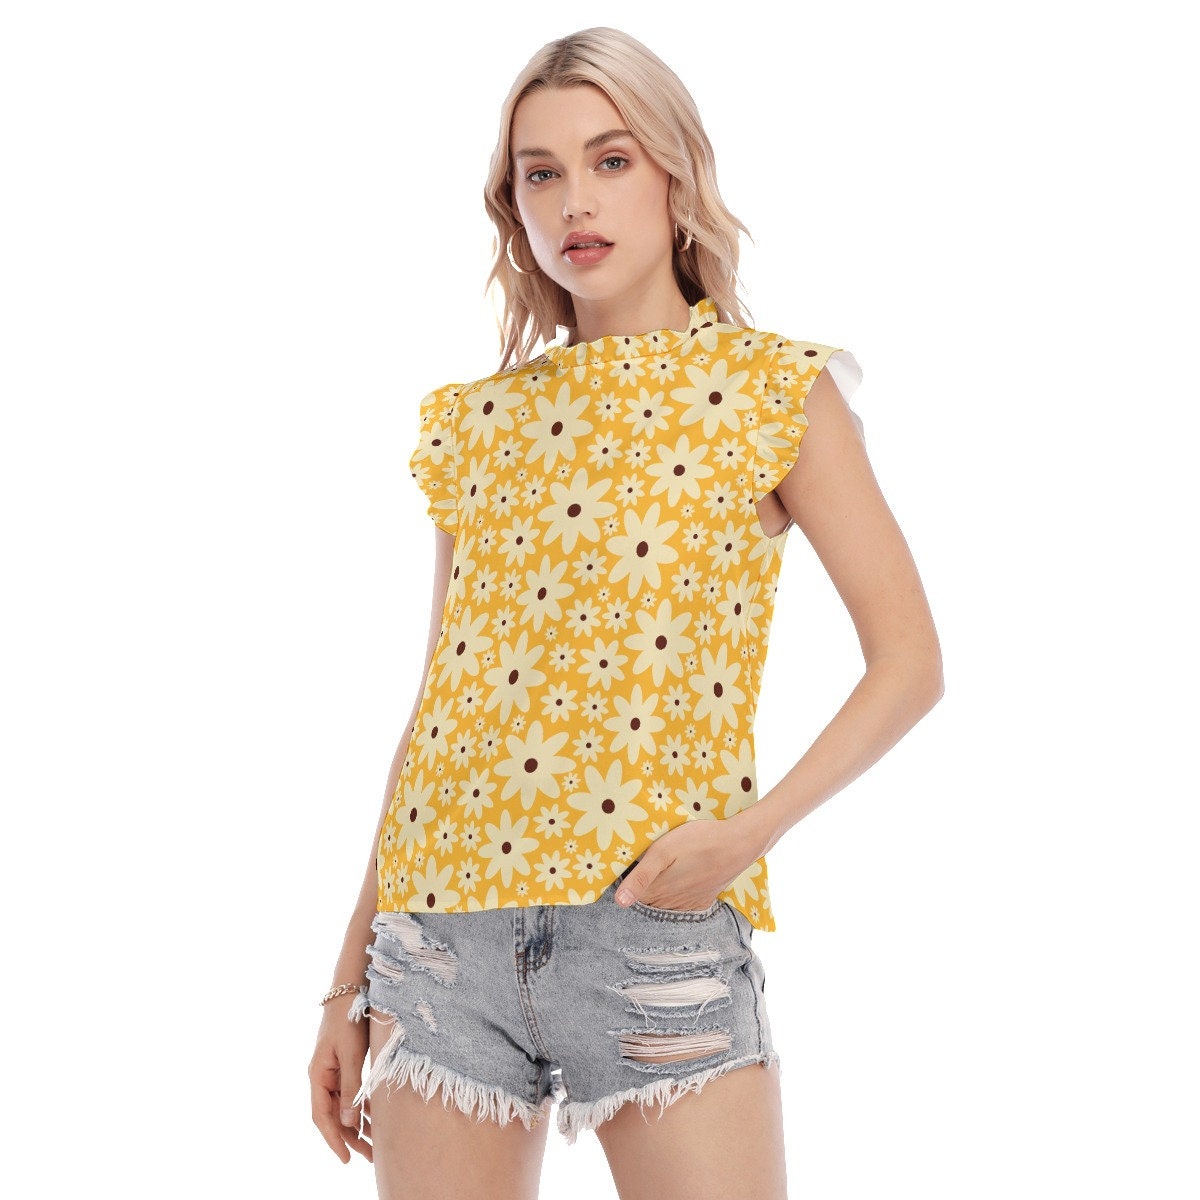 Retro Style Top, Yellow Top Women, Floral Ruffle Top, 60s 70s style top,70s inspired top, Floral Blouse, Floral Top, Vintage Style top